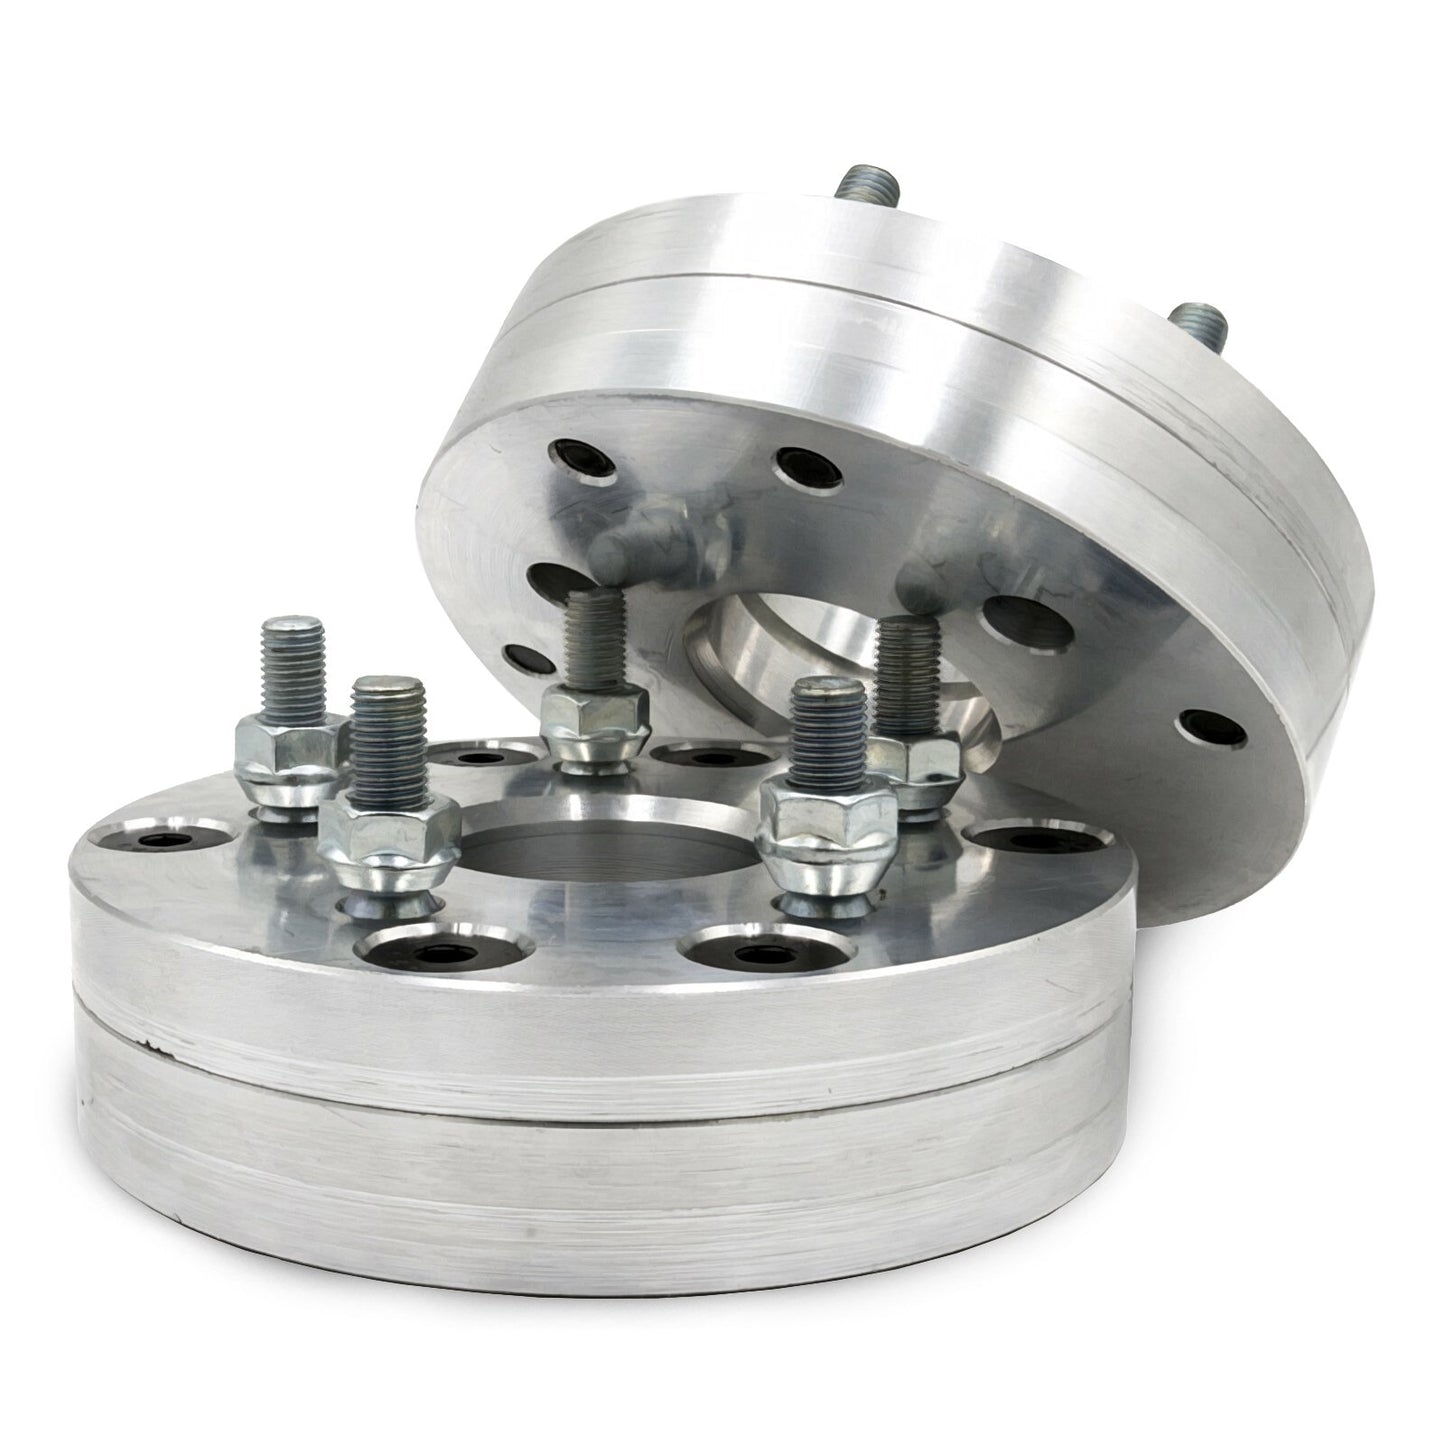 4x130 to 5x4.5" 2 piece Wheel Adapter - Thickness: 1.5" - 3"